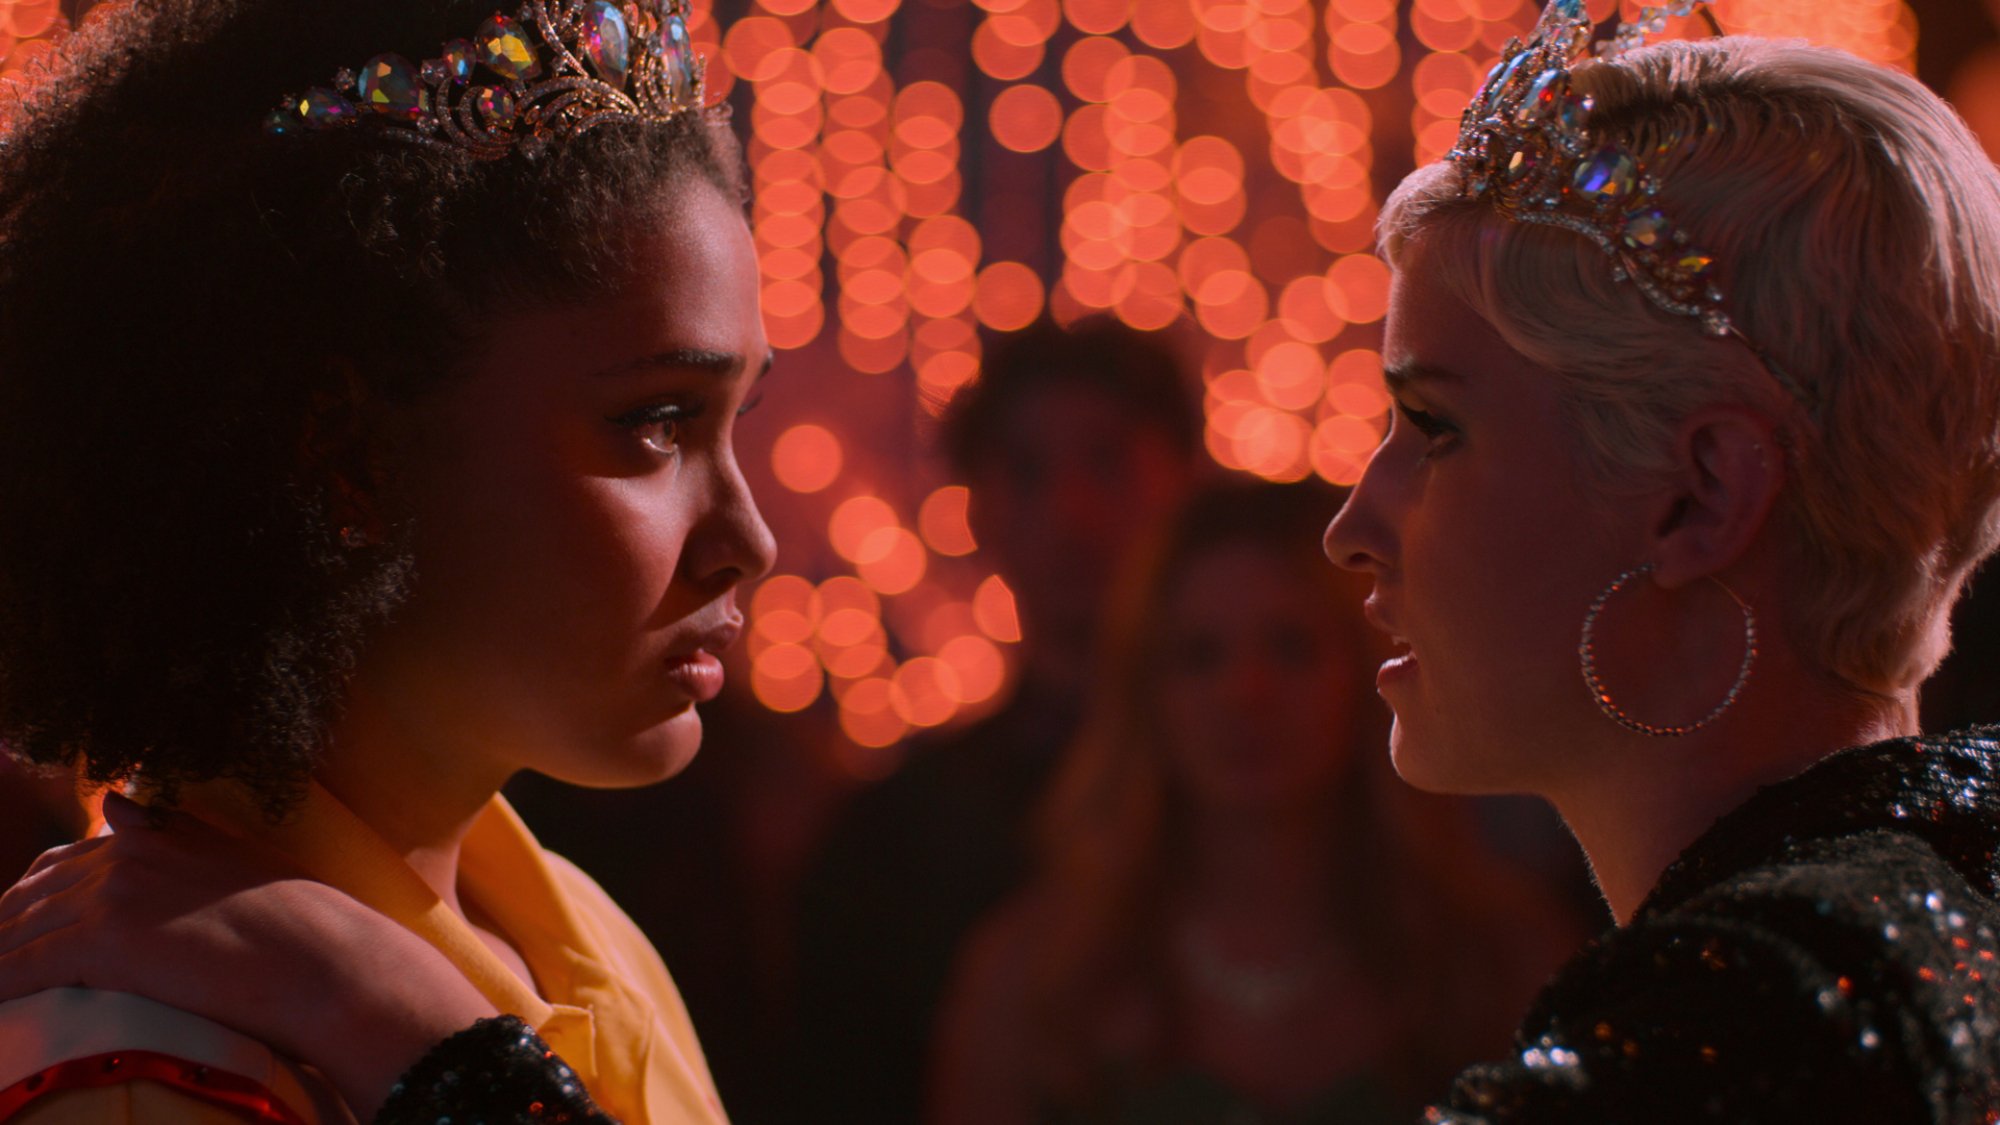 Two teen girls wearing crowns look into each other's eyes.